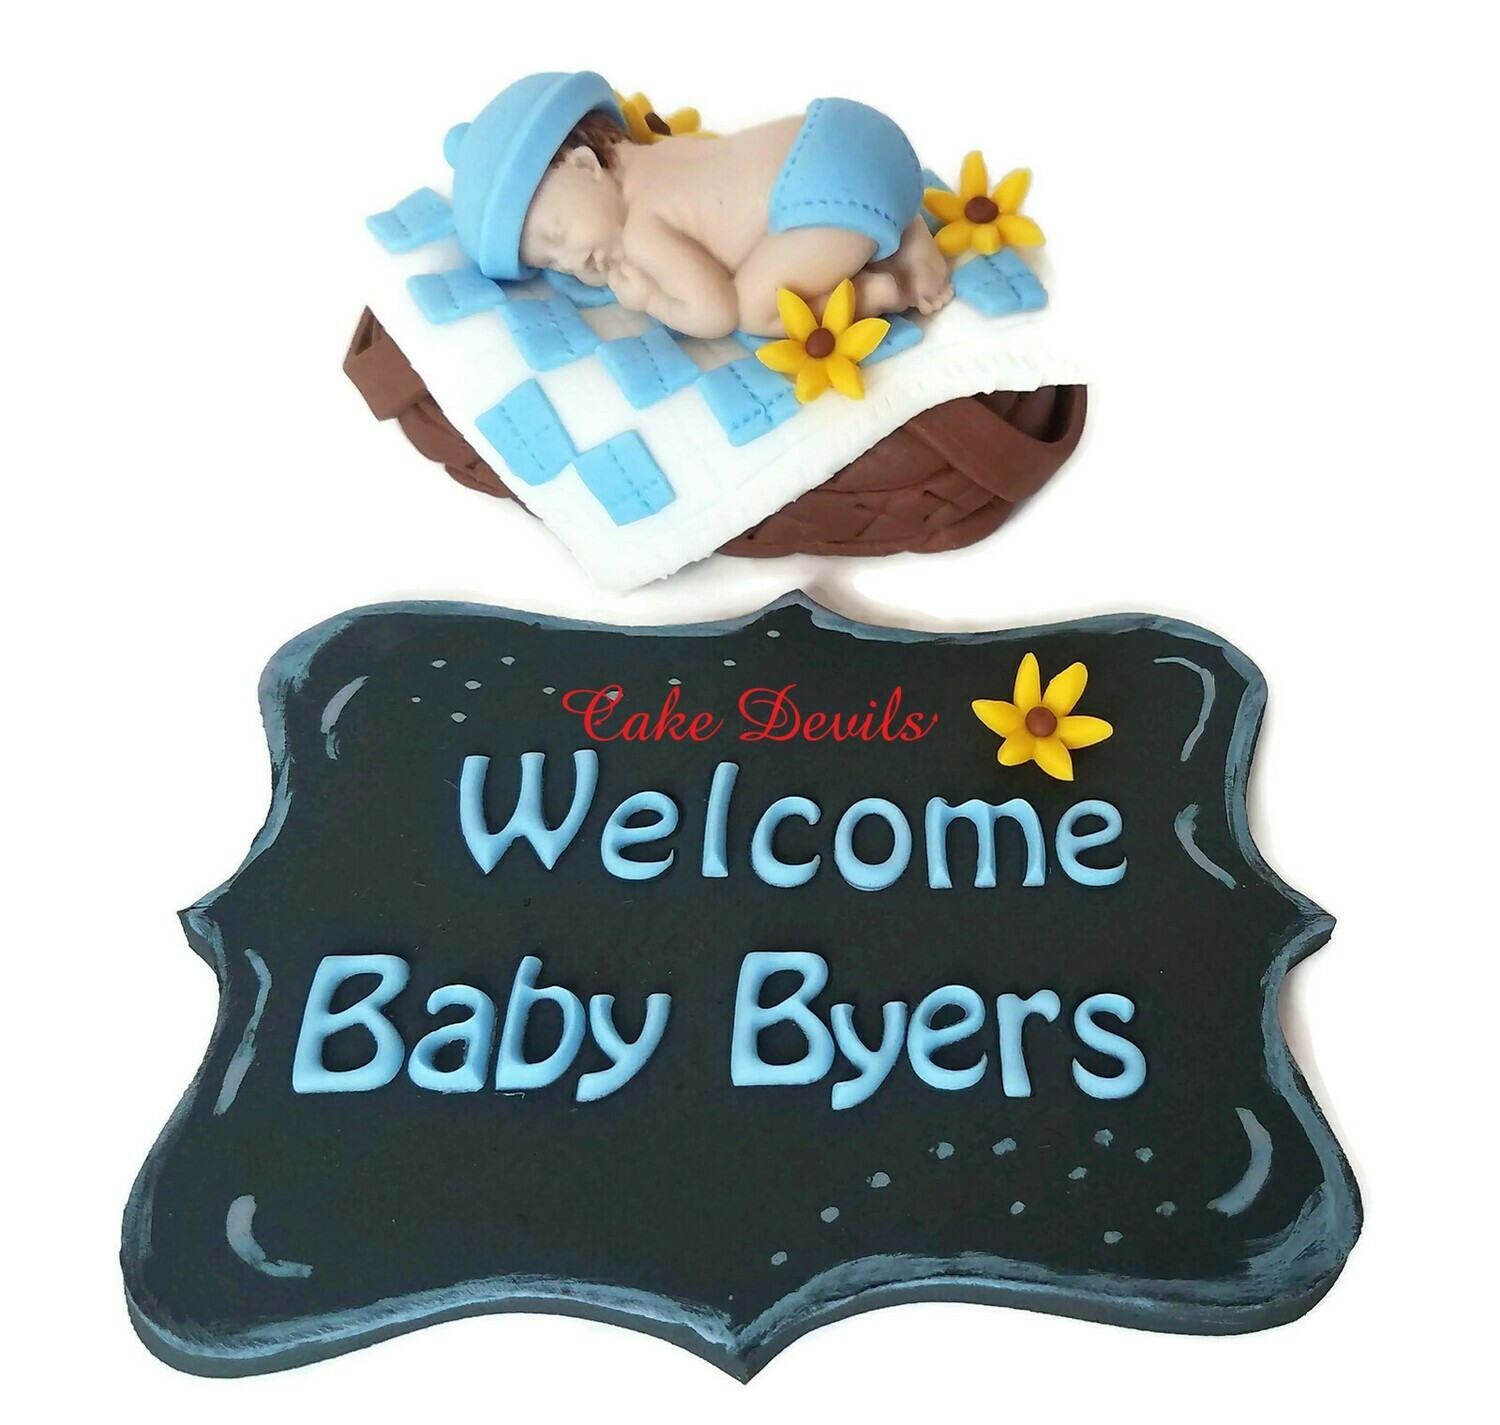 Fondant Baby in a Picnic Basket Baby Shower Cake Topper and Chalkboard Fondant Plaque